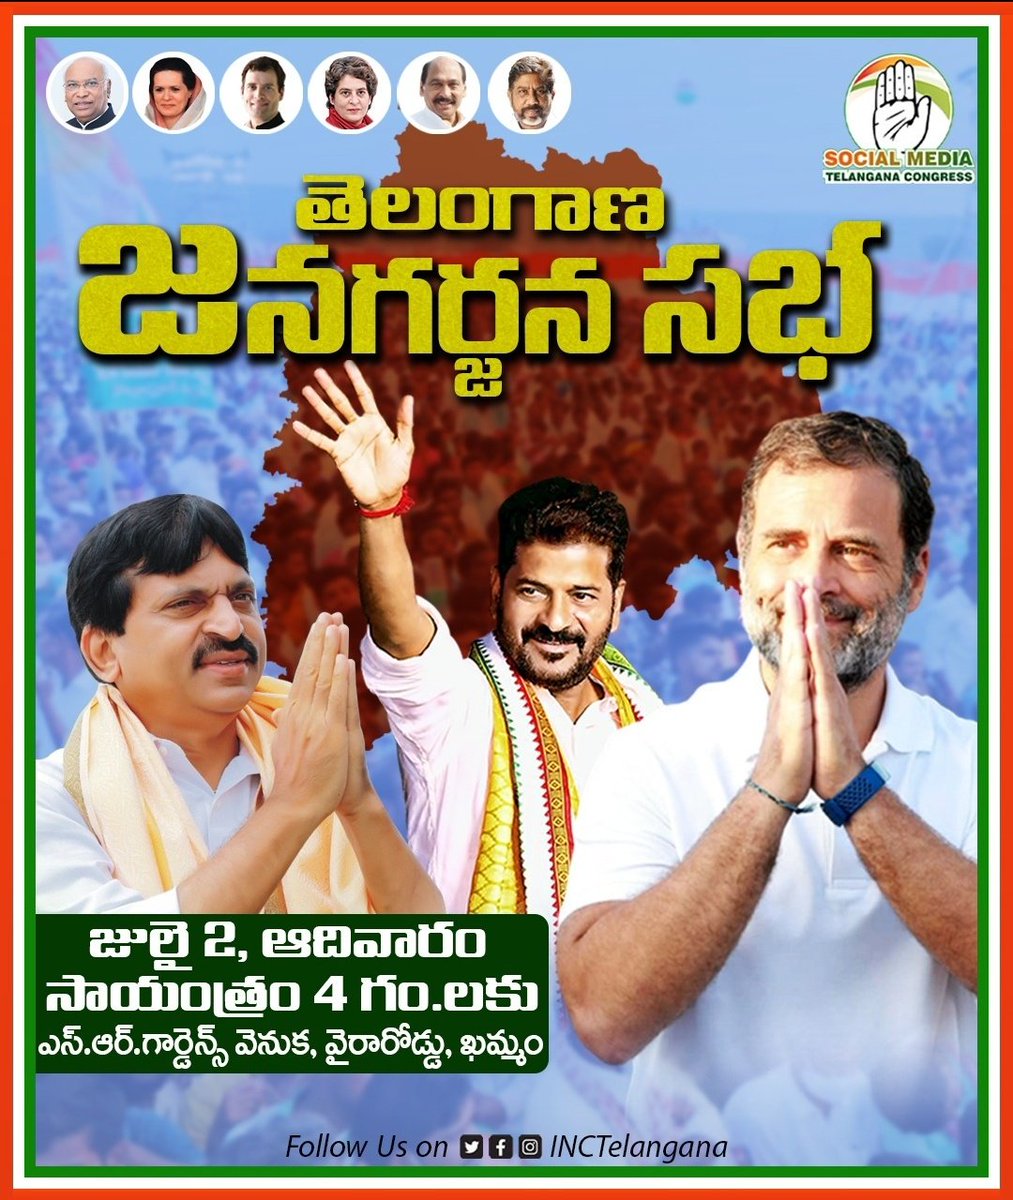 Just 1 day to Go....
Excited to see RaGa in khammam ❤️